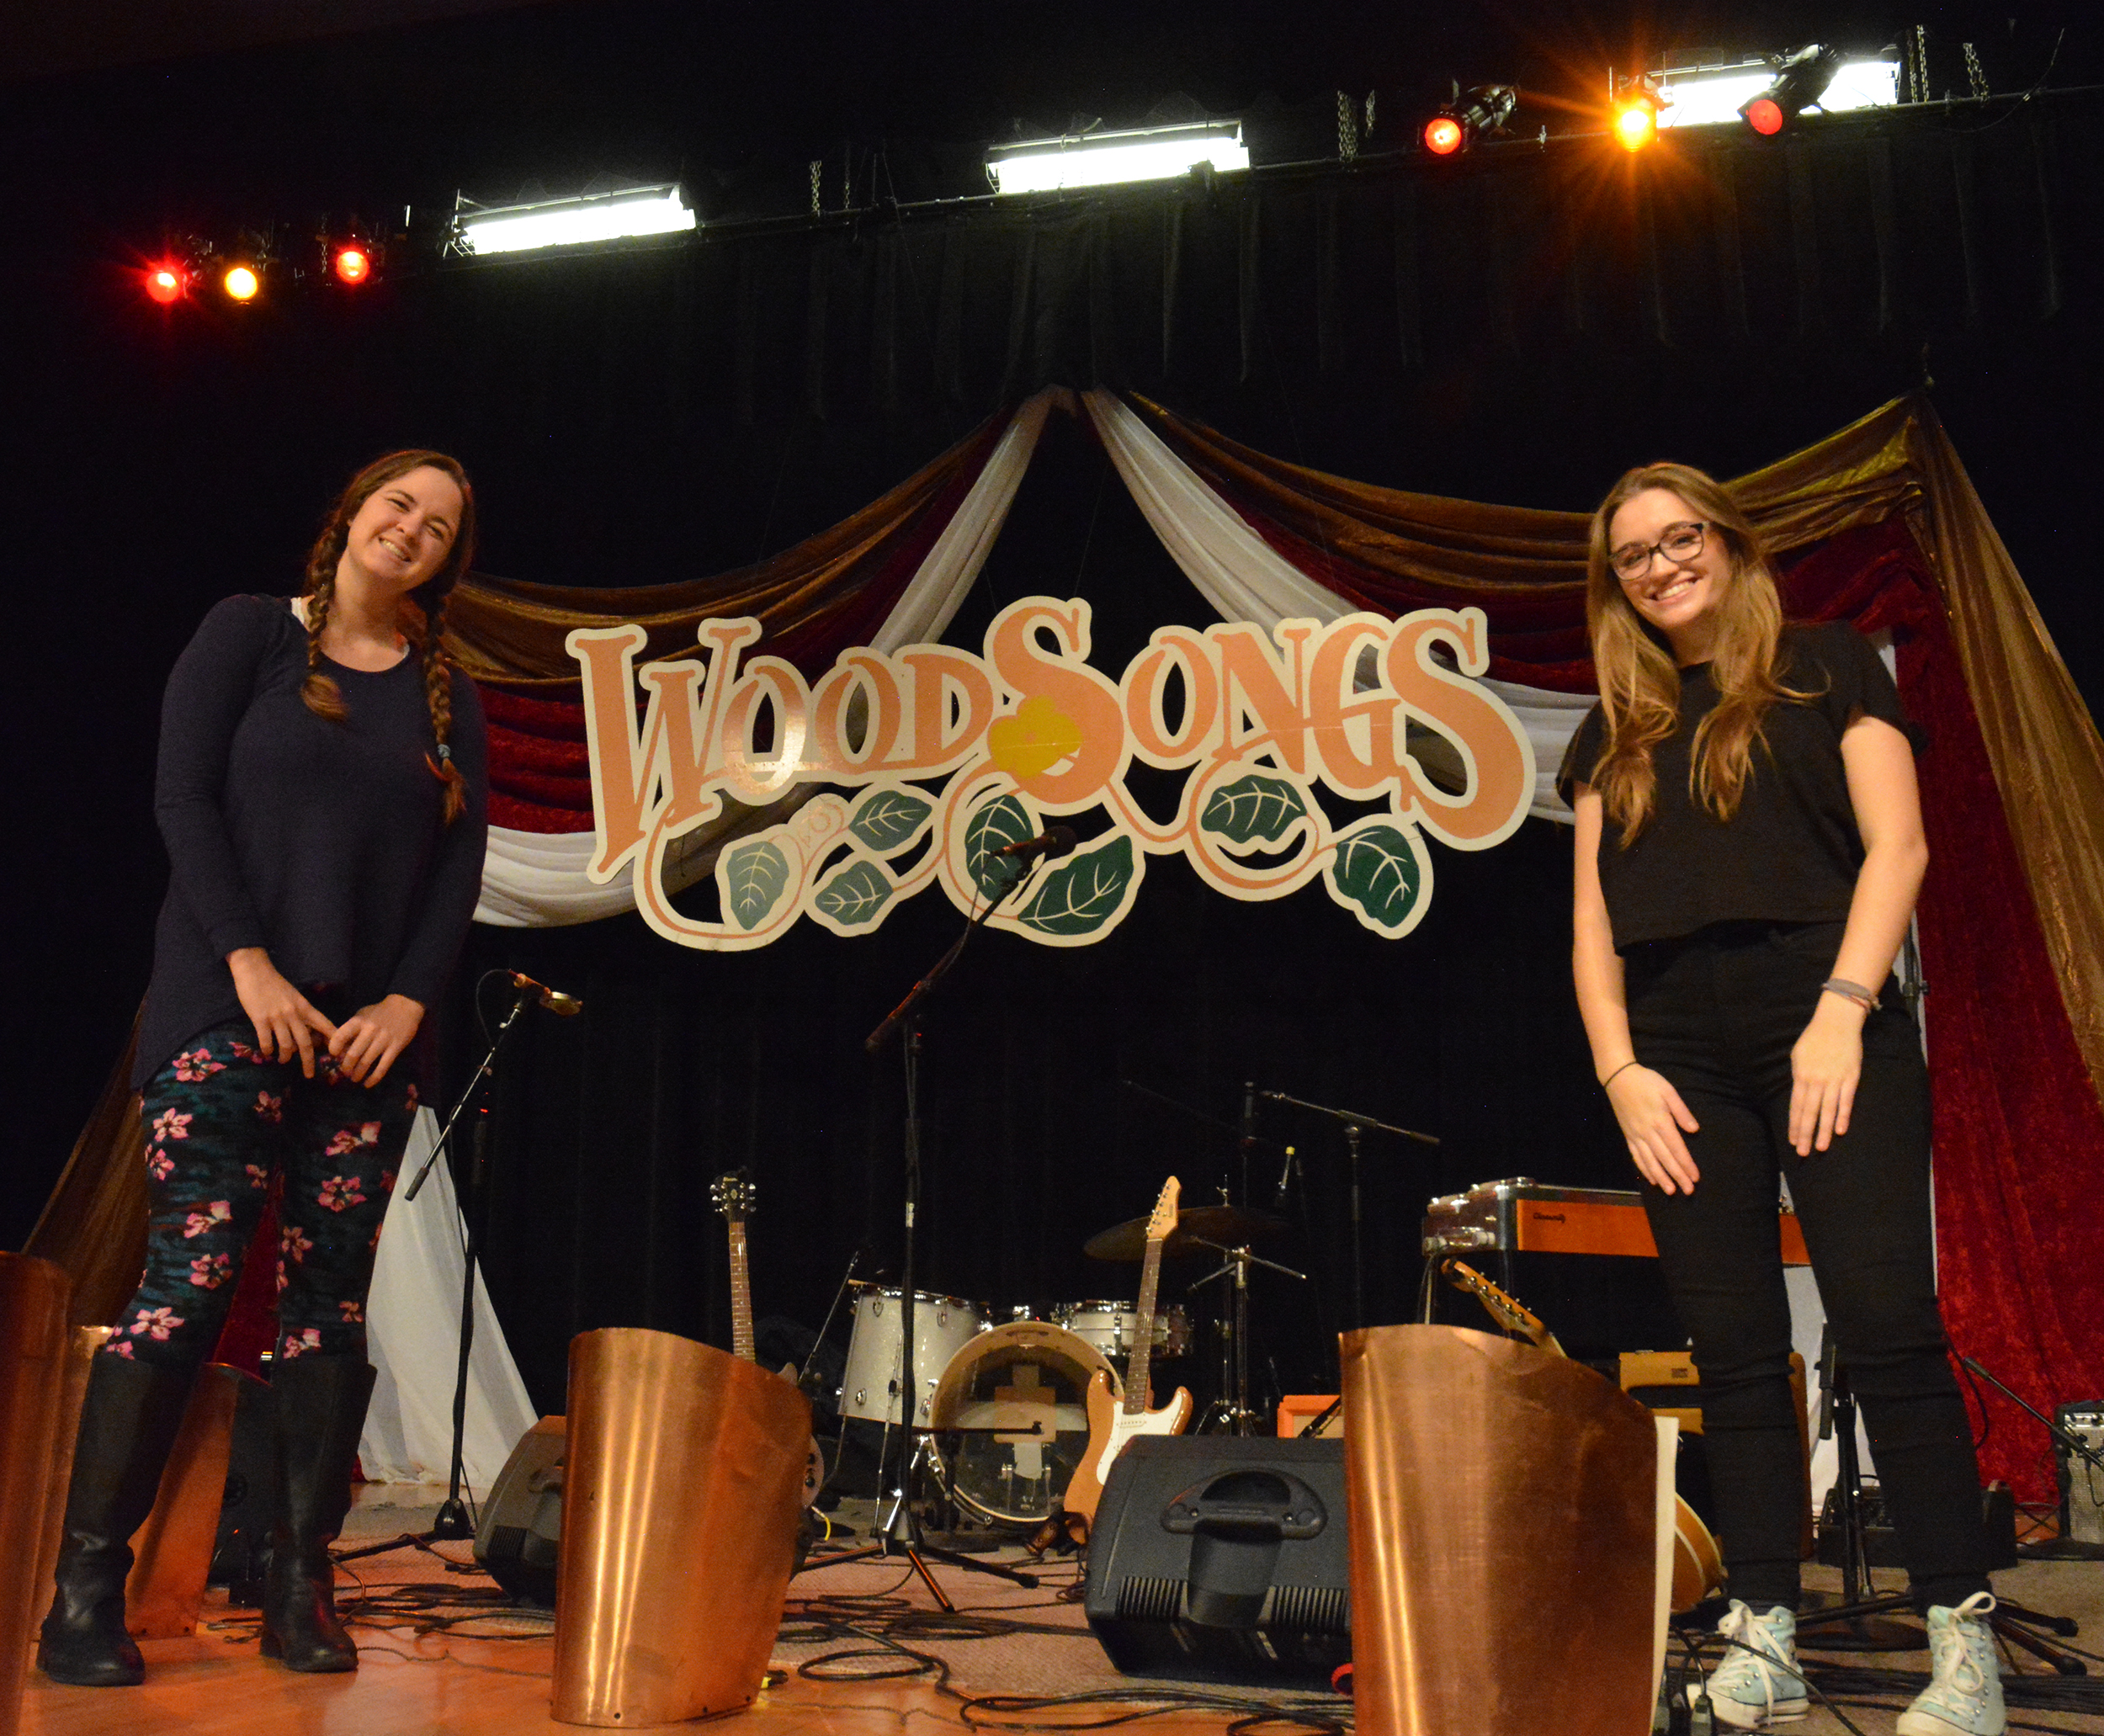 Volunteering for WoodSongs strikes chord with Transylvania students